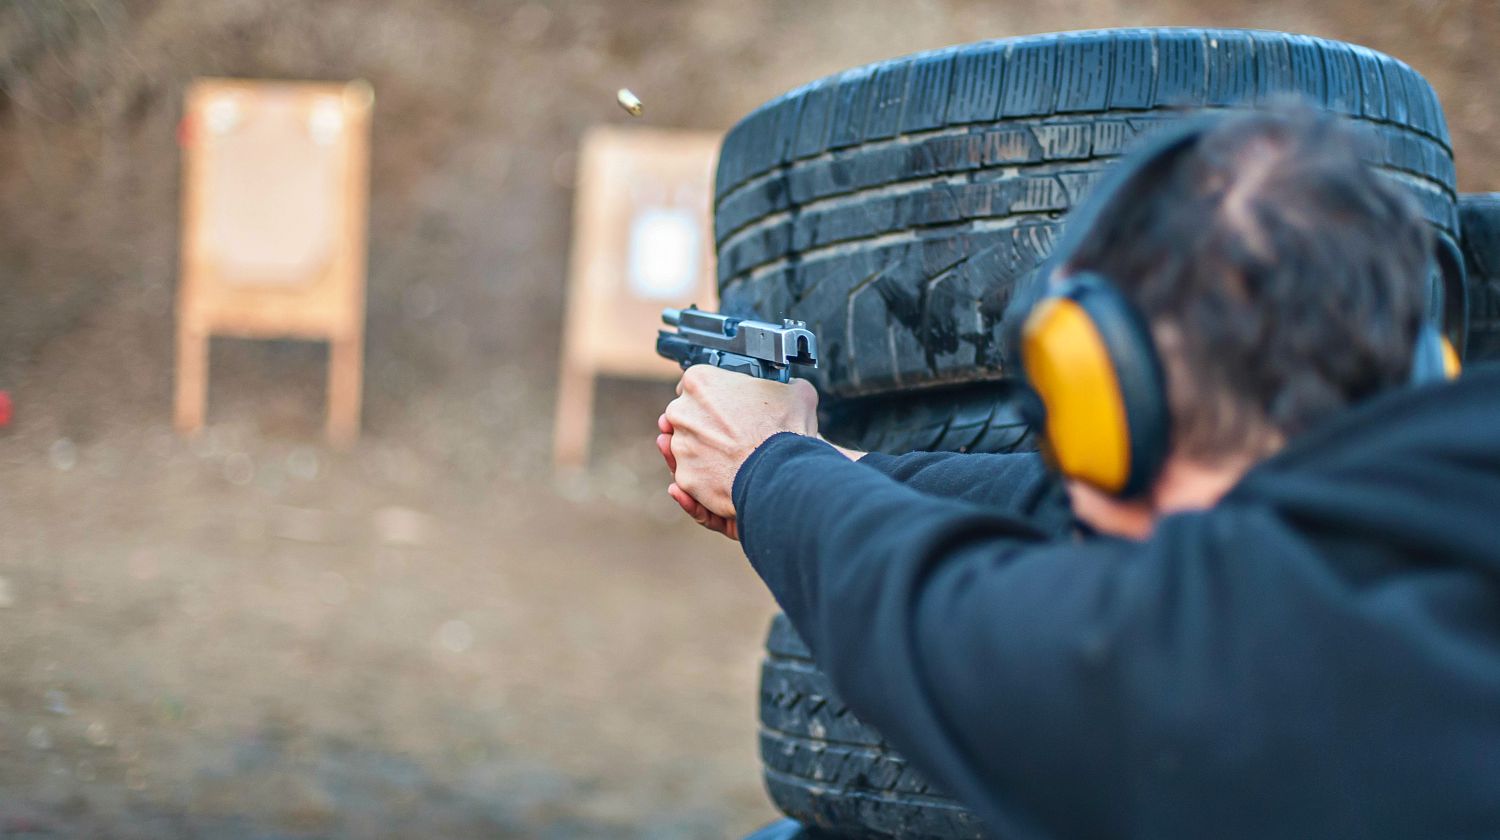 Featured | Advanced outdoor tactical shooting on target around barrier and wall | Active Shooter Training: How To Prepare For An Active Shooter